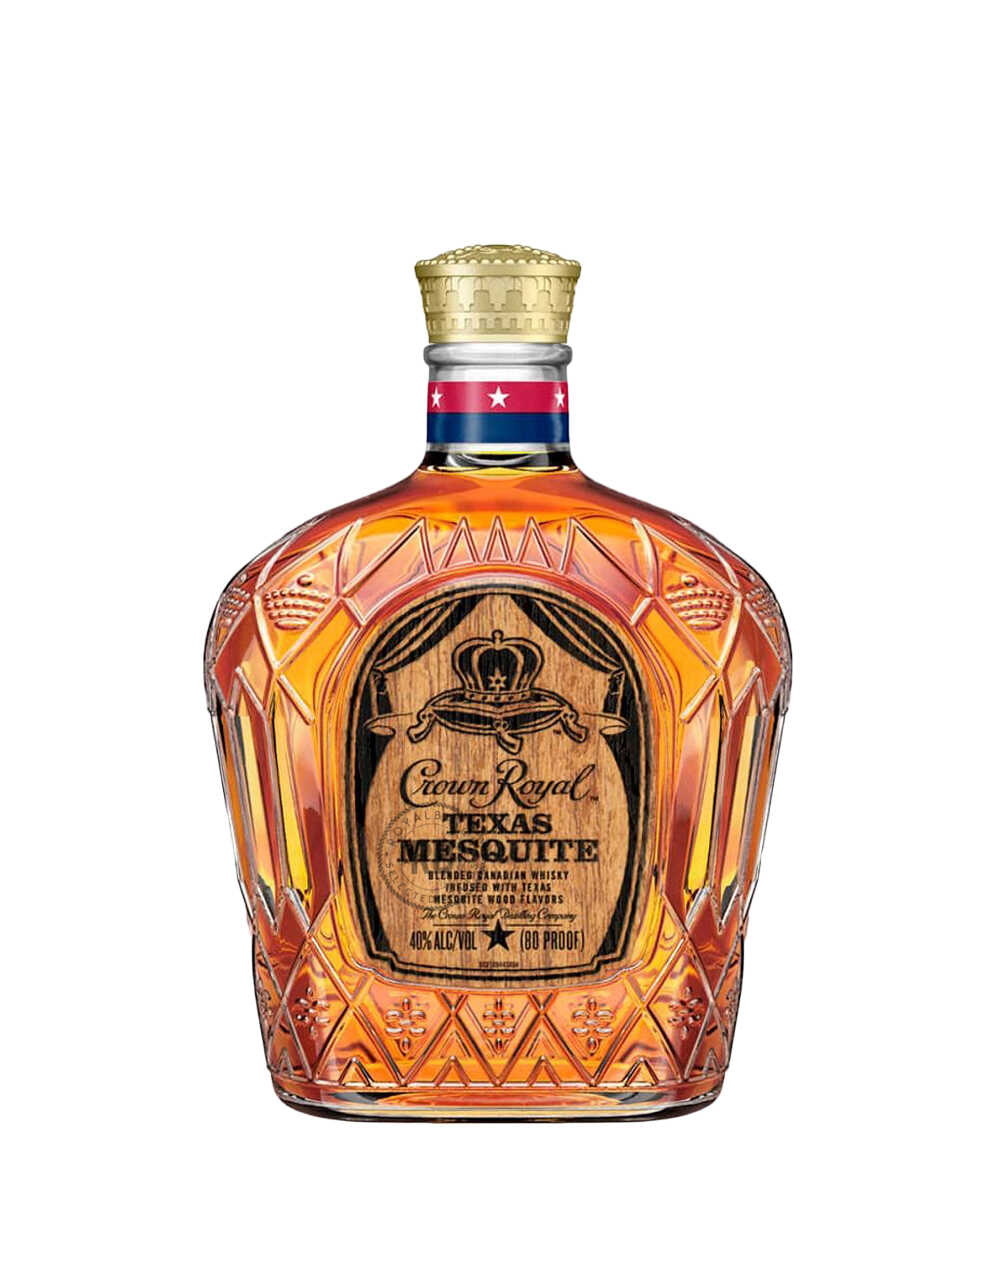 Crown Royal Texas Mesquite Canadian Whisky